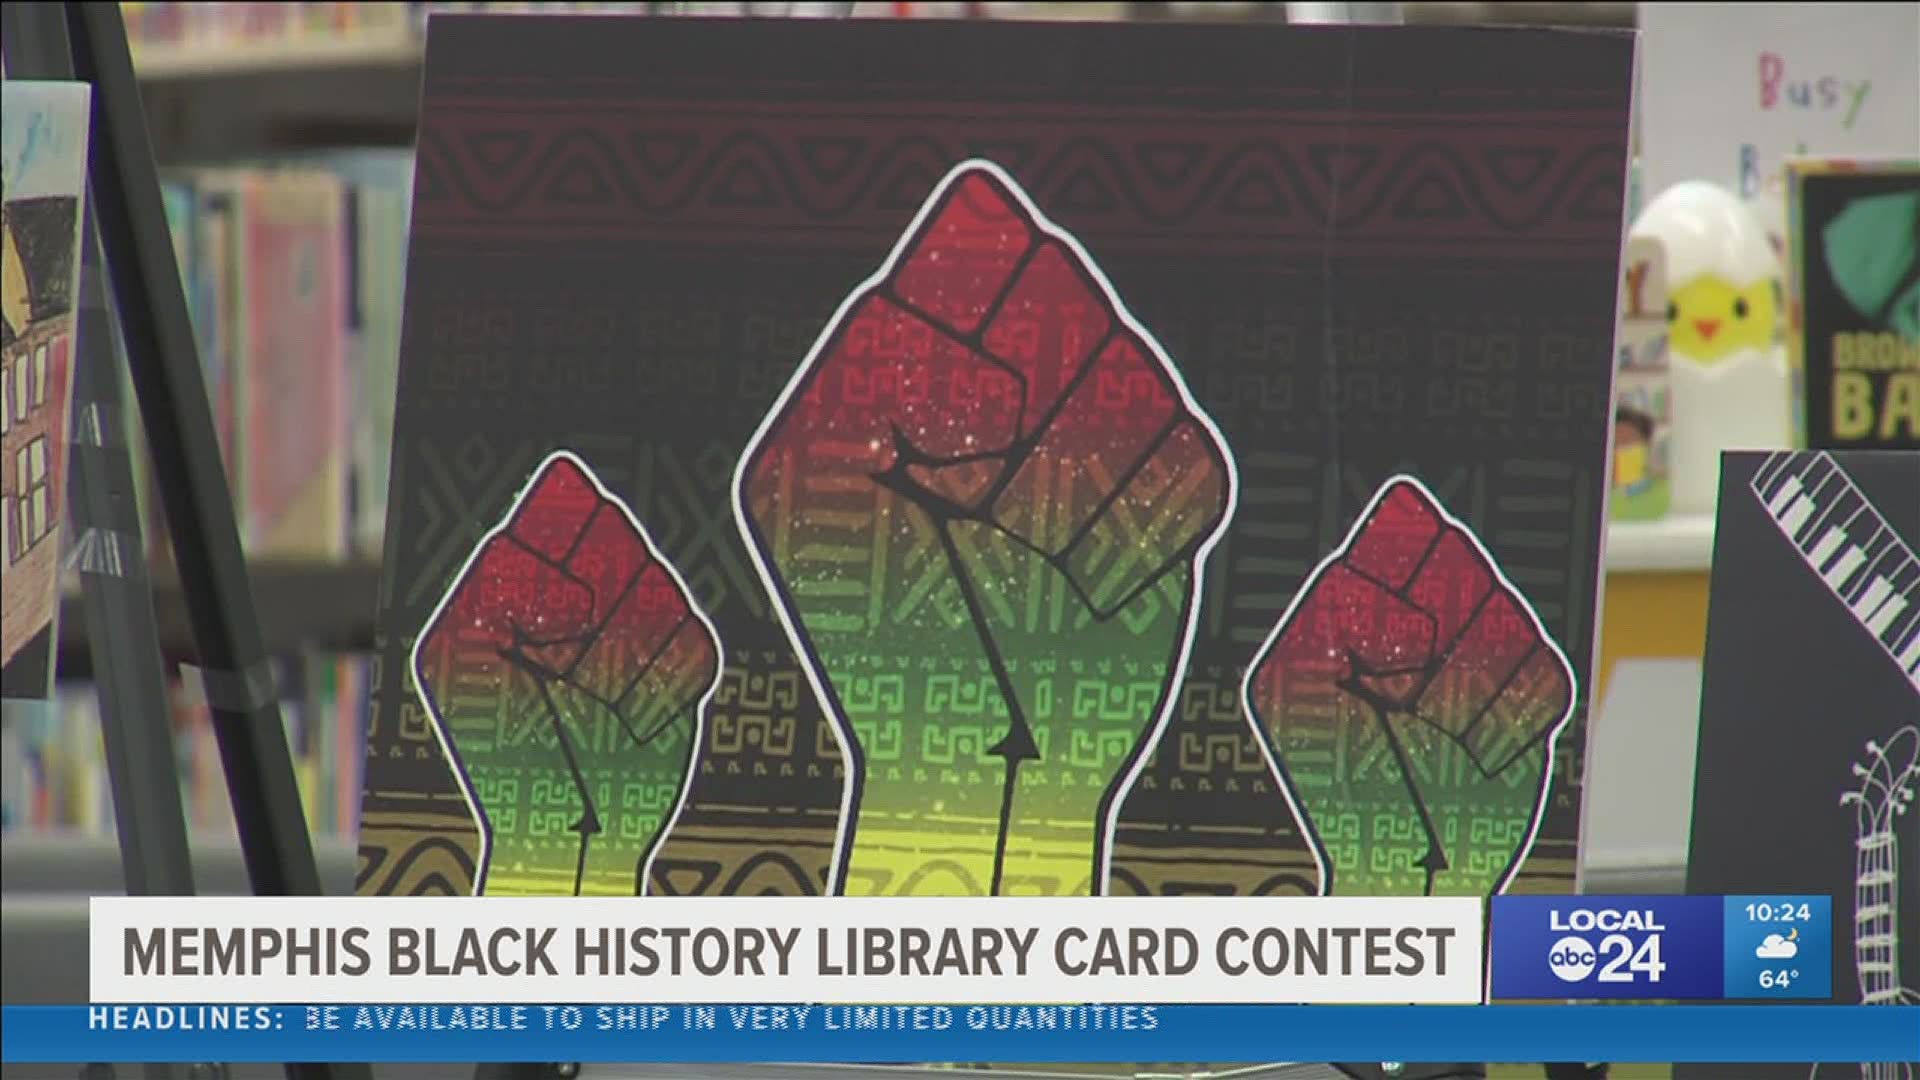 Each winner gets their artwork on library cards this June for Juneteenth as well as a $200 gift card and an art supply kit.